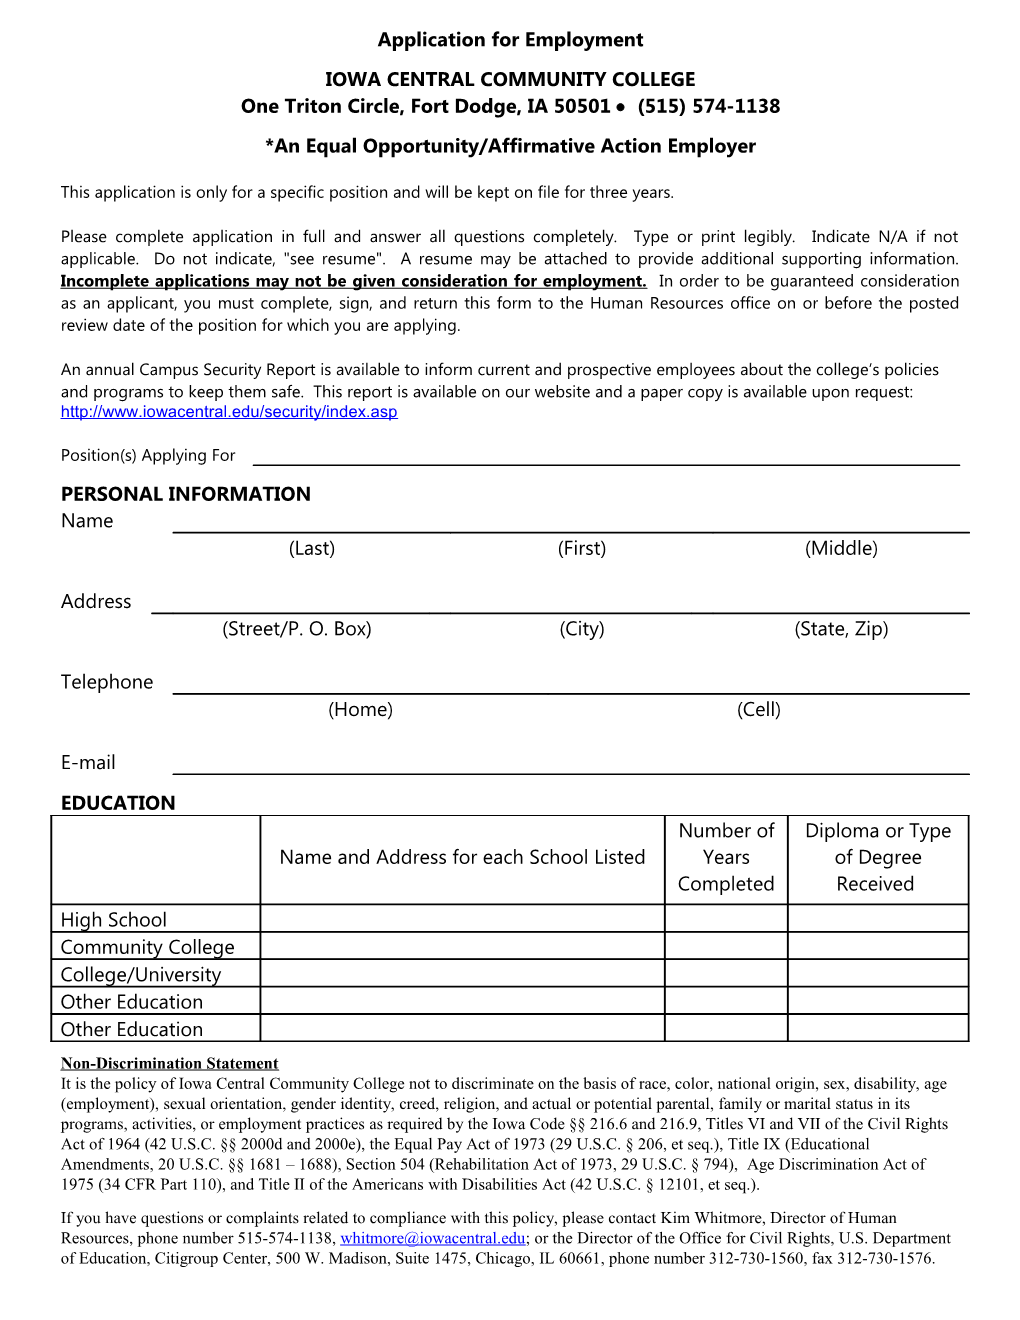 Application for Employment s75